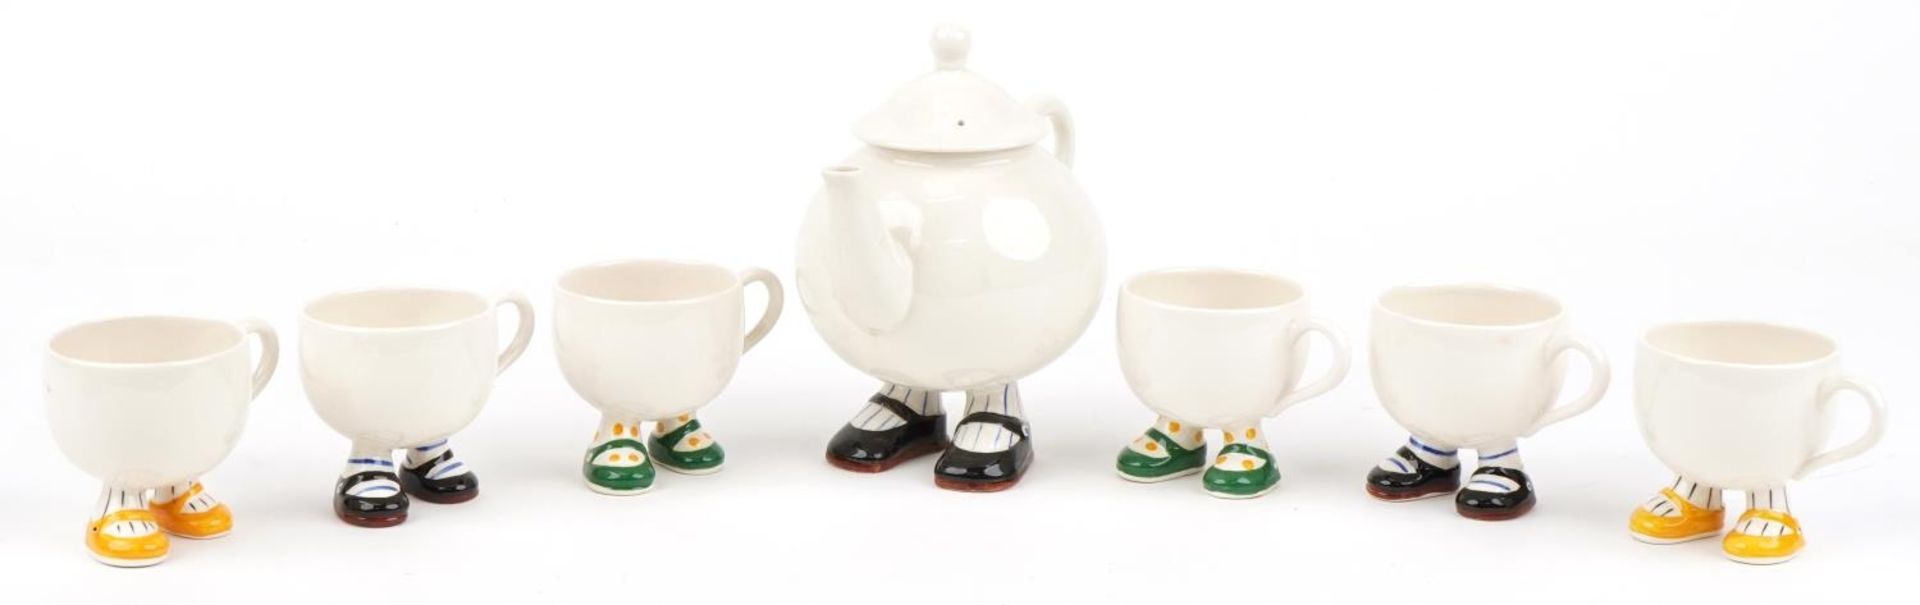 Carltonware Walking teaware comprising teapot and six cups, the largest 21cm in length - Image 2 of 12